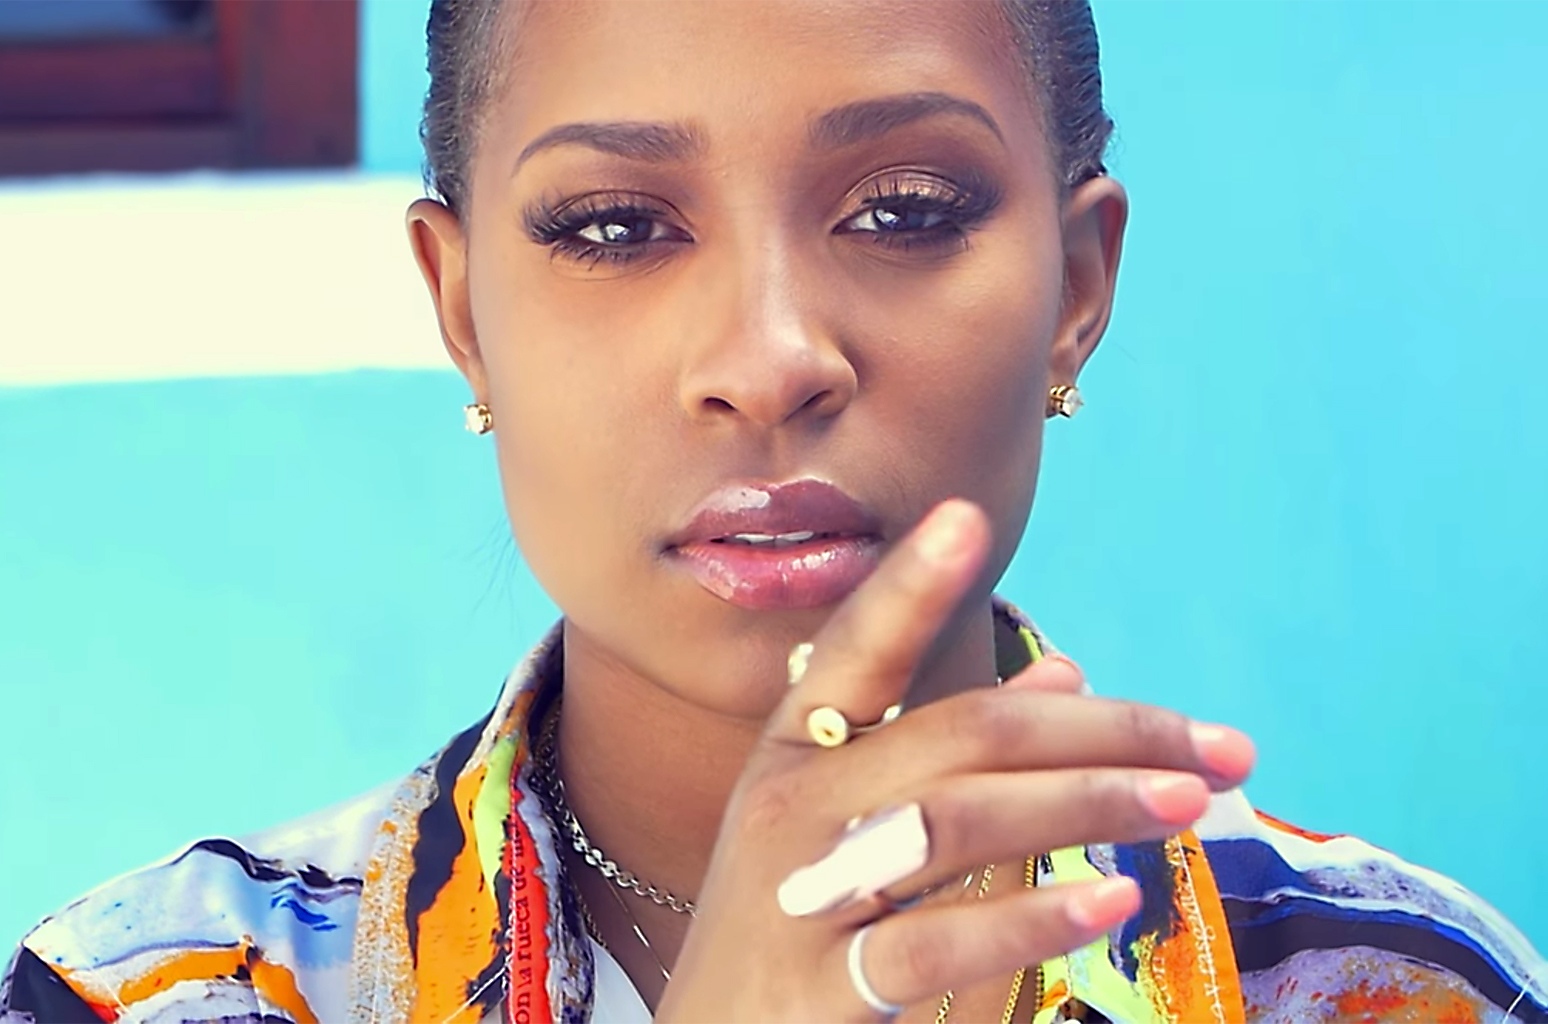 DeJ Loaf Offers To Liberate New York Residents By Covering Marriage License...